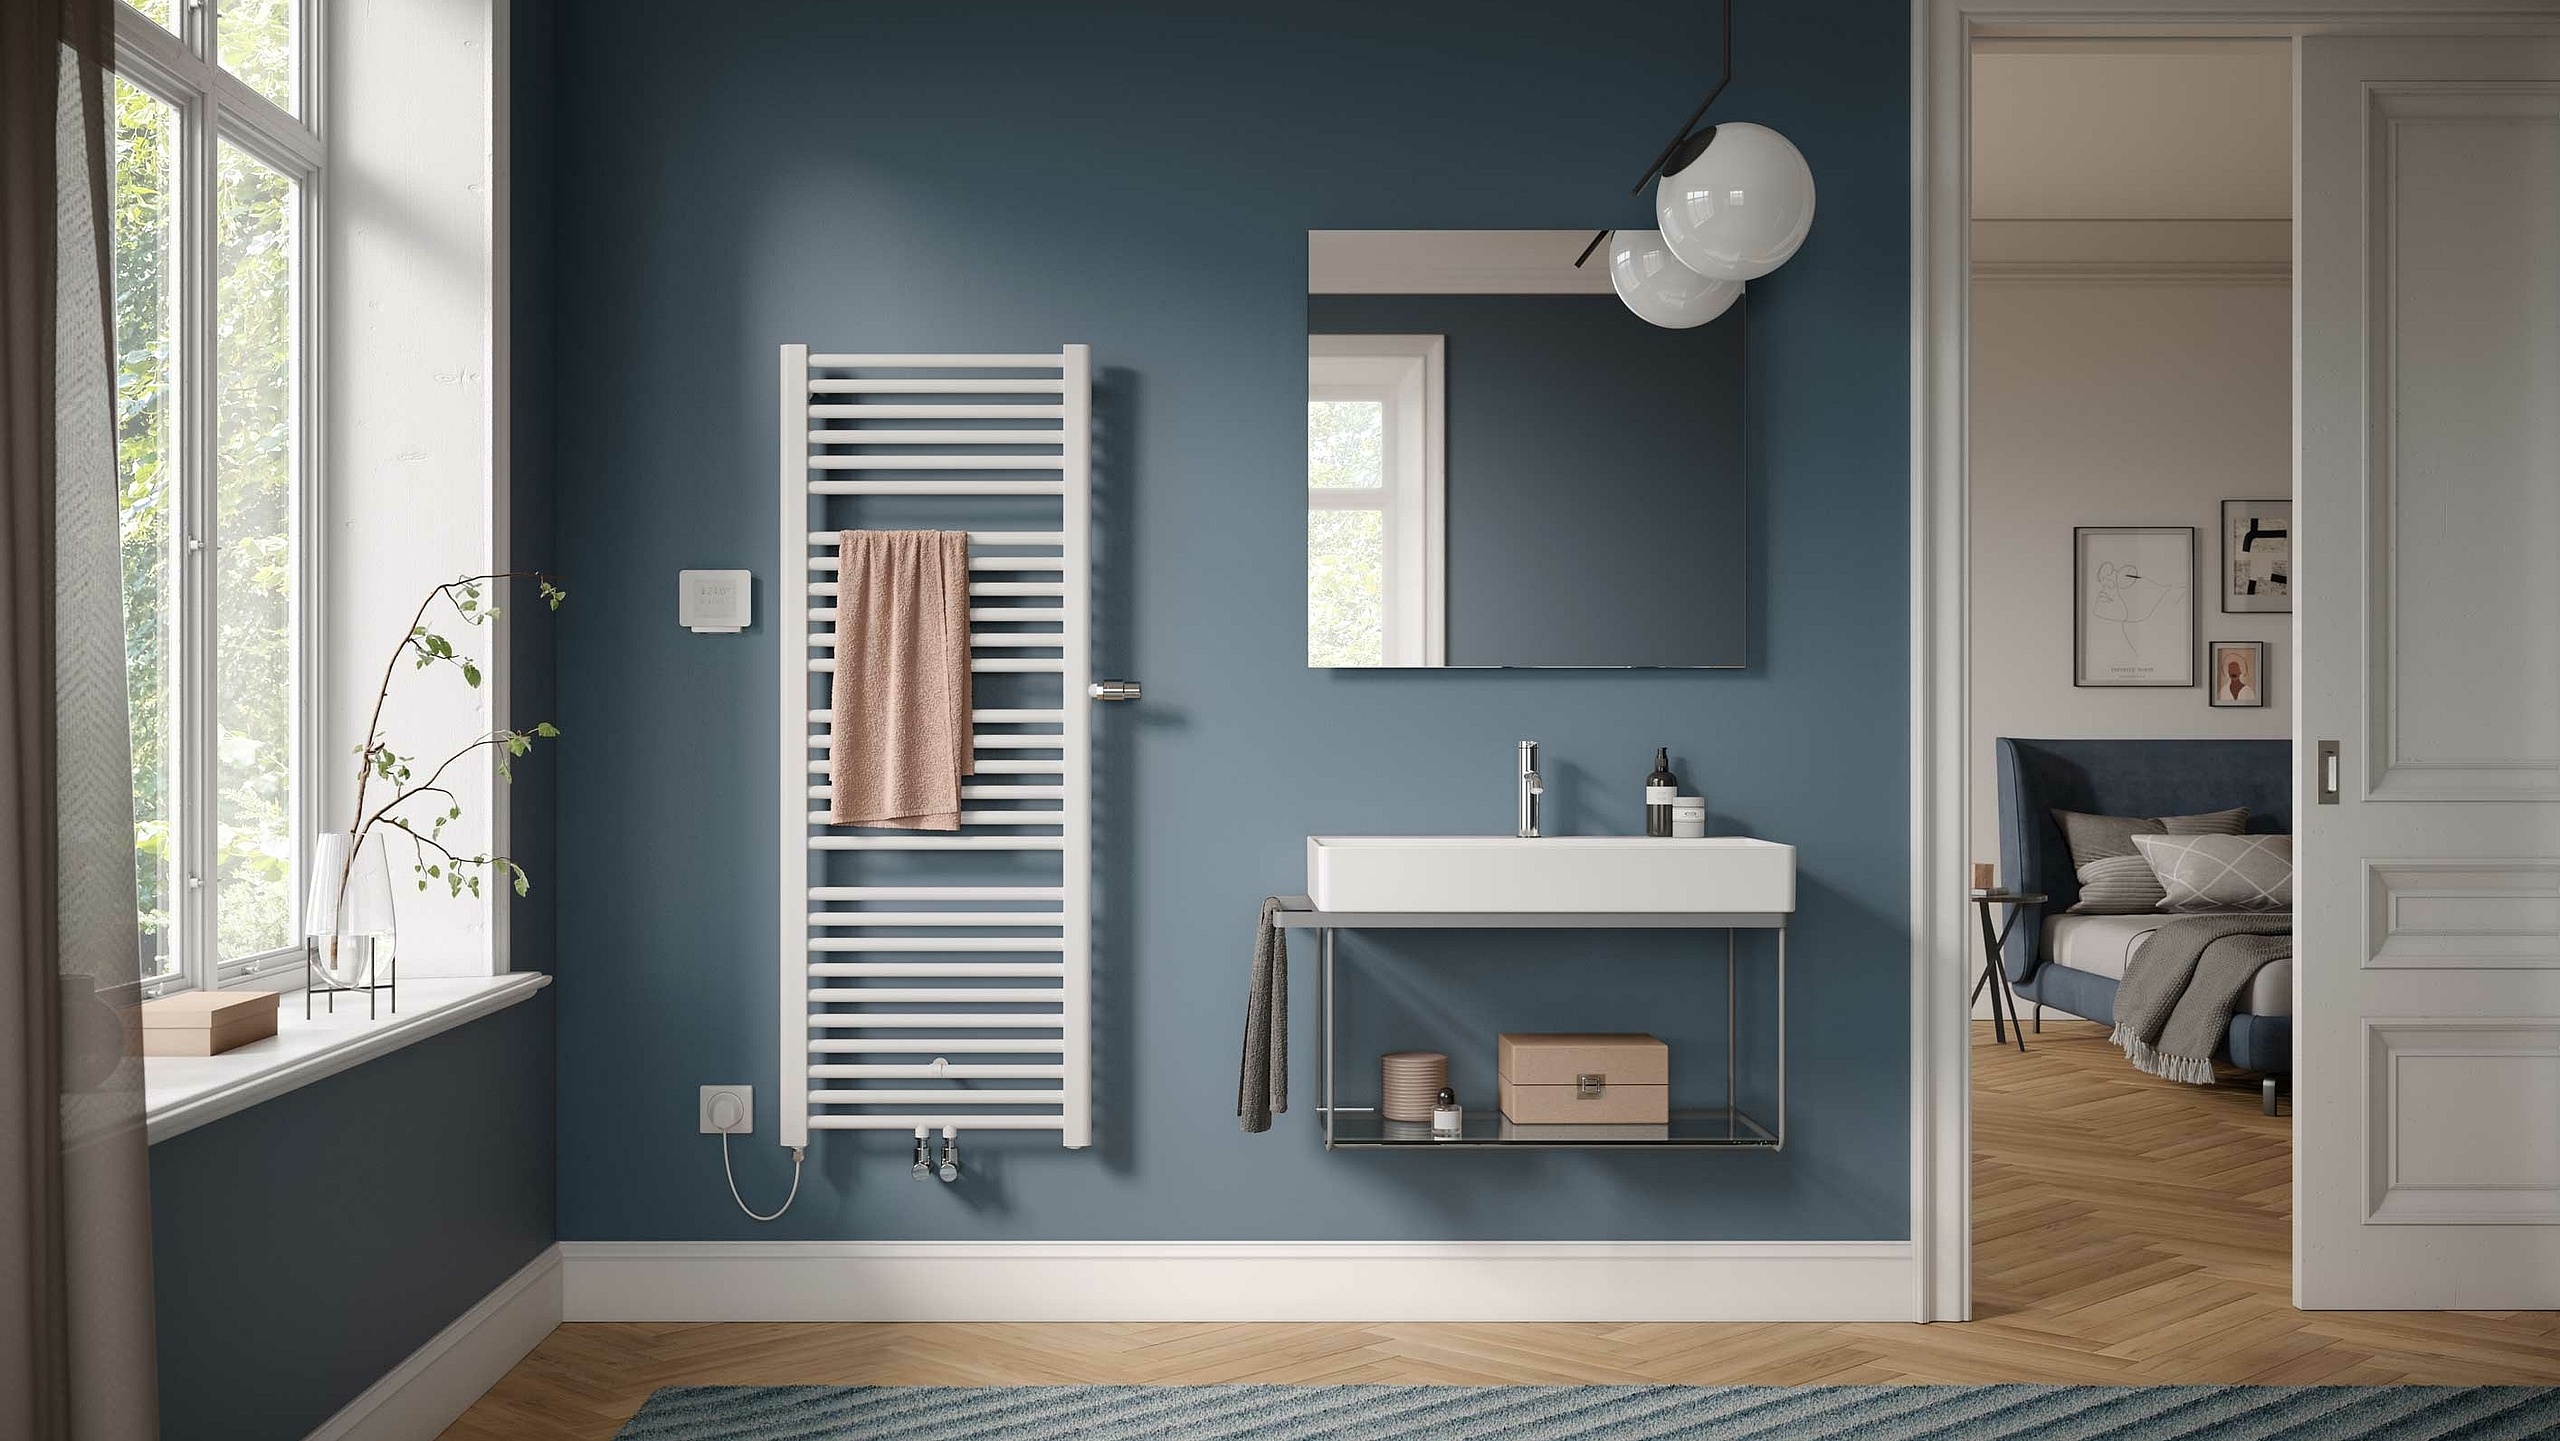 Kermi Basic plus design and bathroom radiators also available in an electric version.